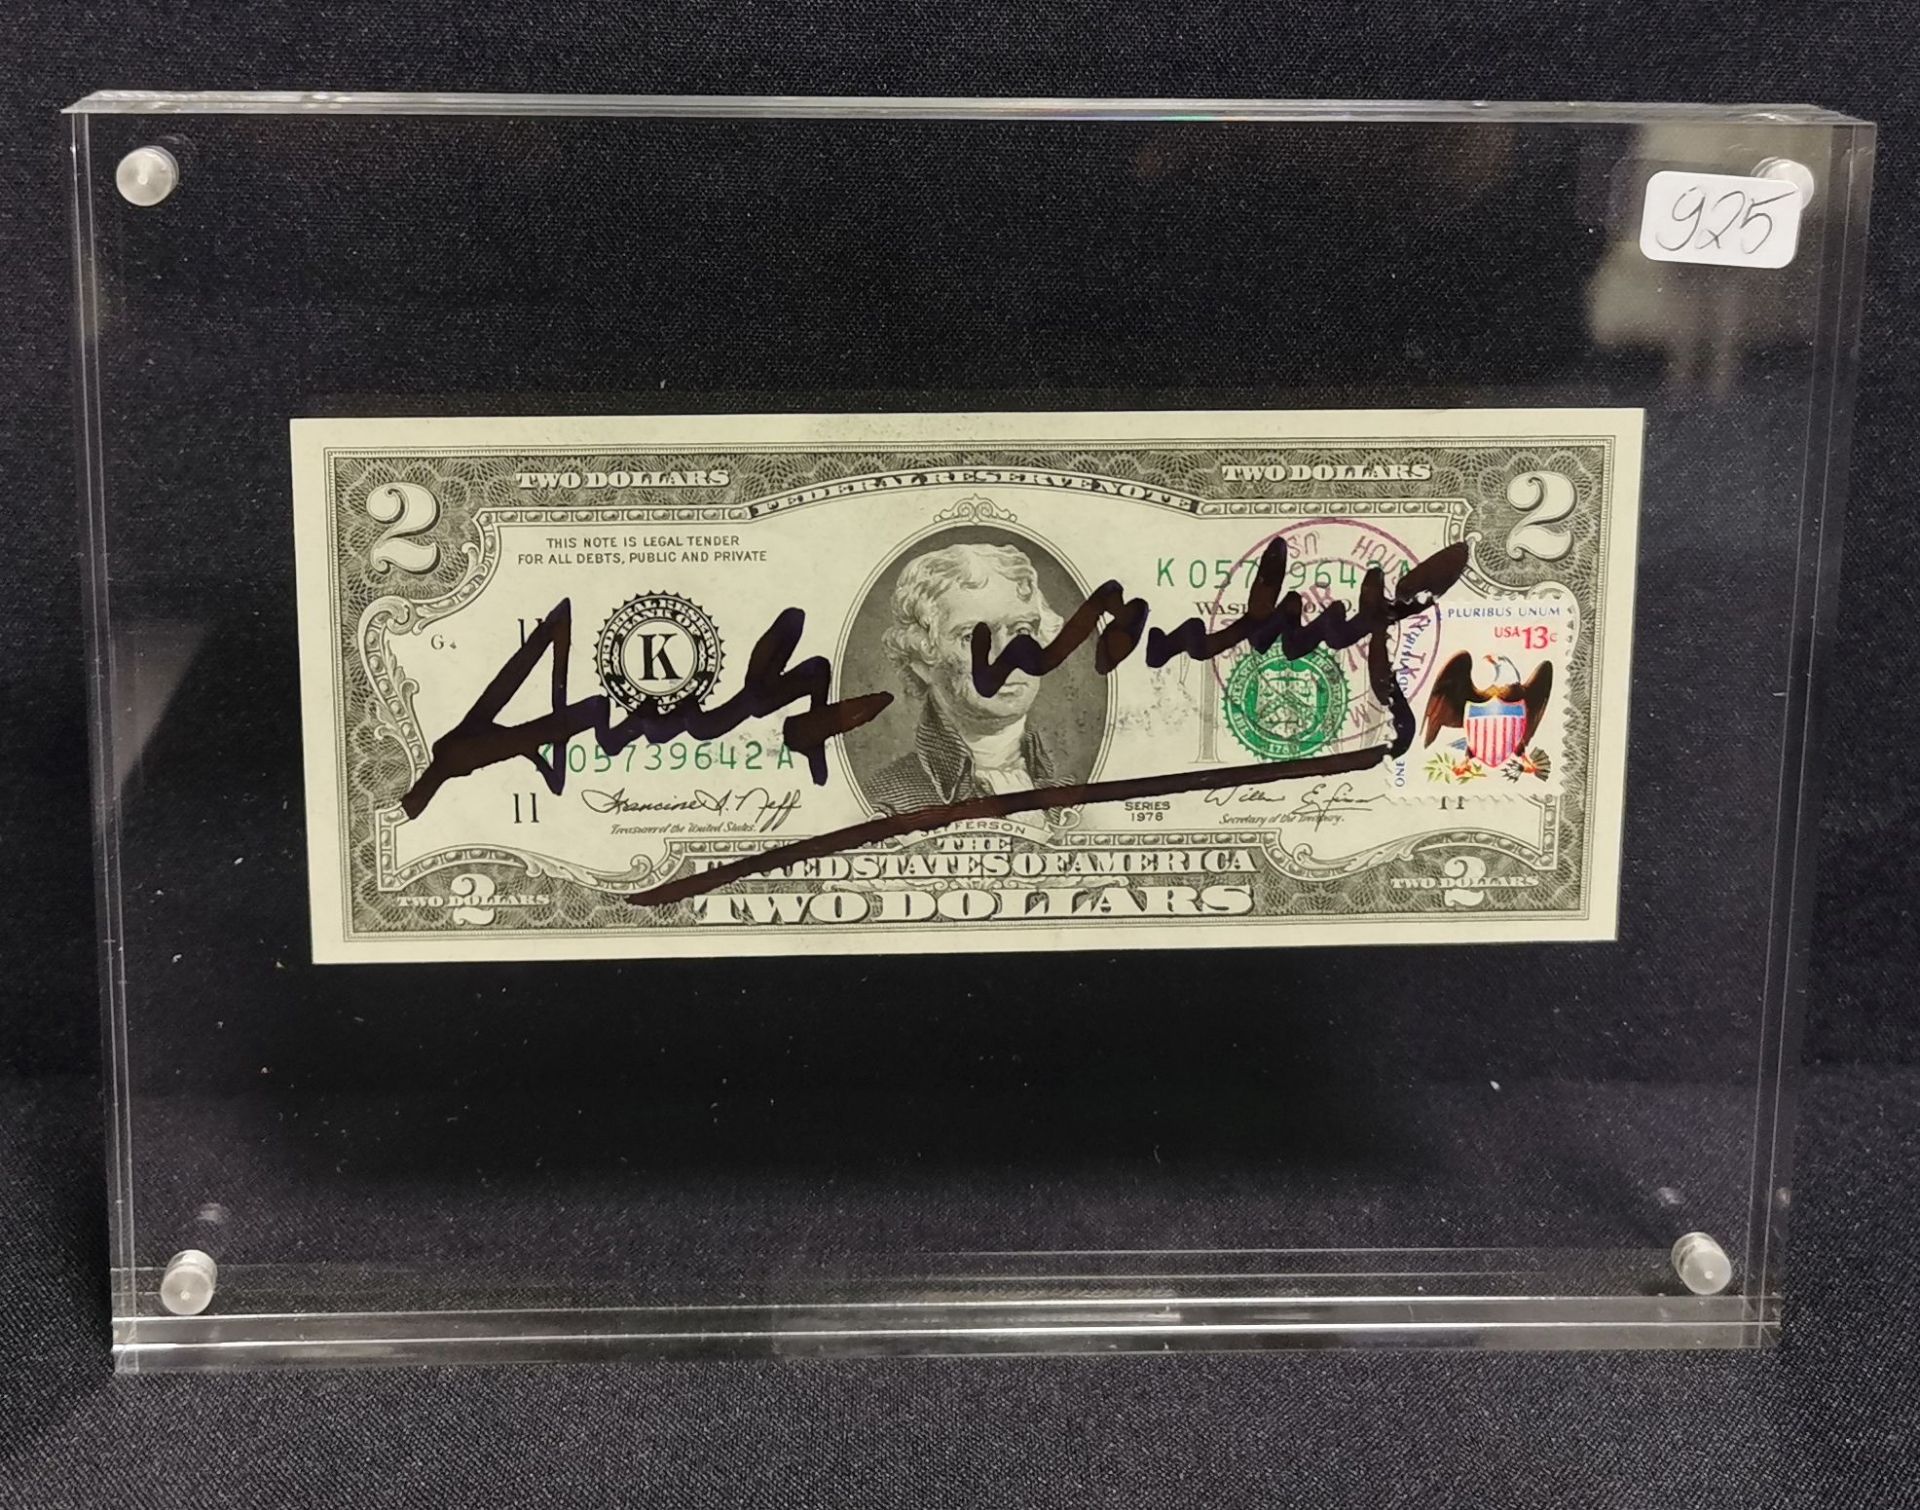 ANDY WARHOL - TWO DOLLAR - Image 3 of 3